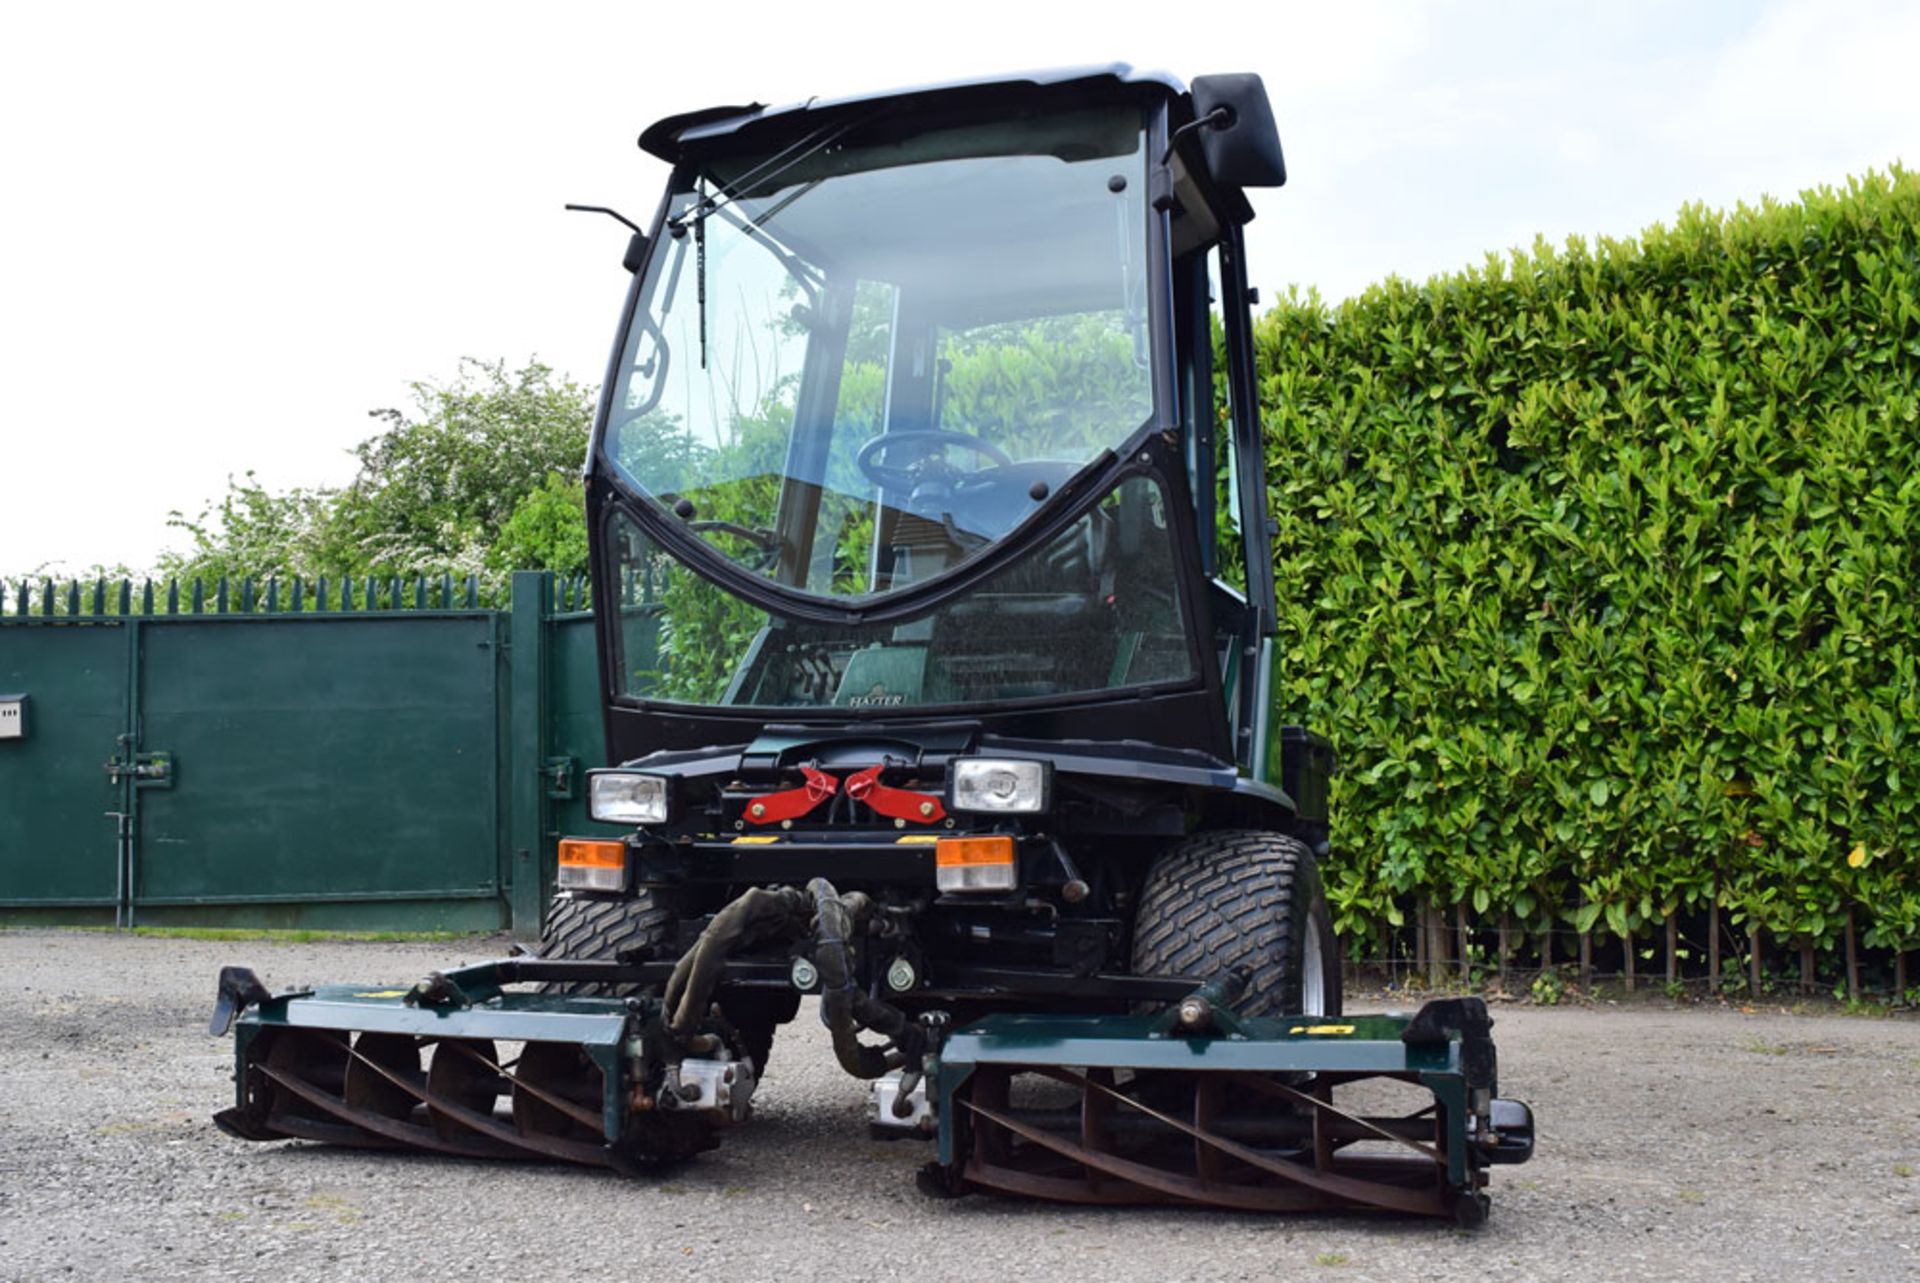 2010 Hayter LT324 Triple Cylinder Mower With Cab - Image 3 of 7